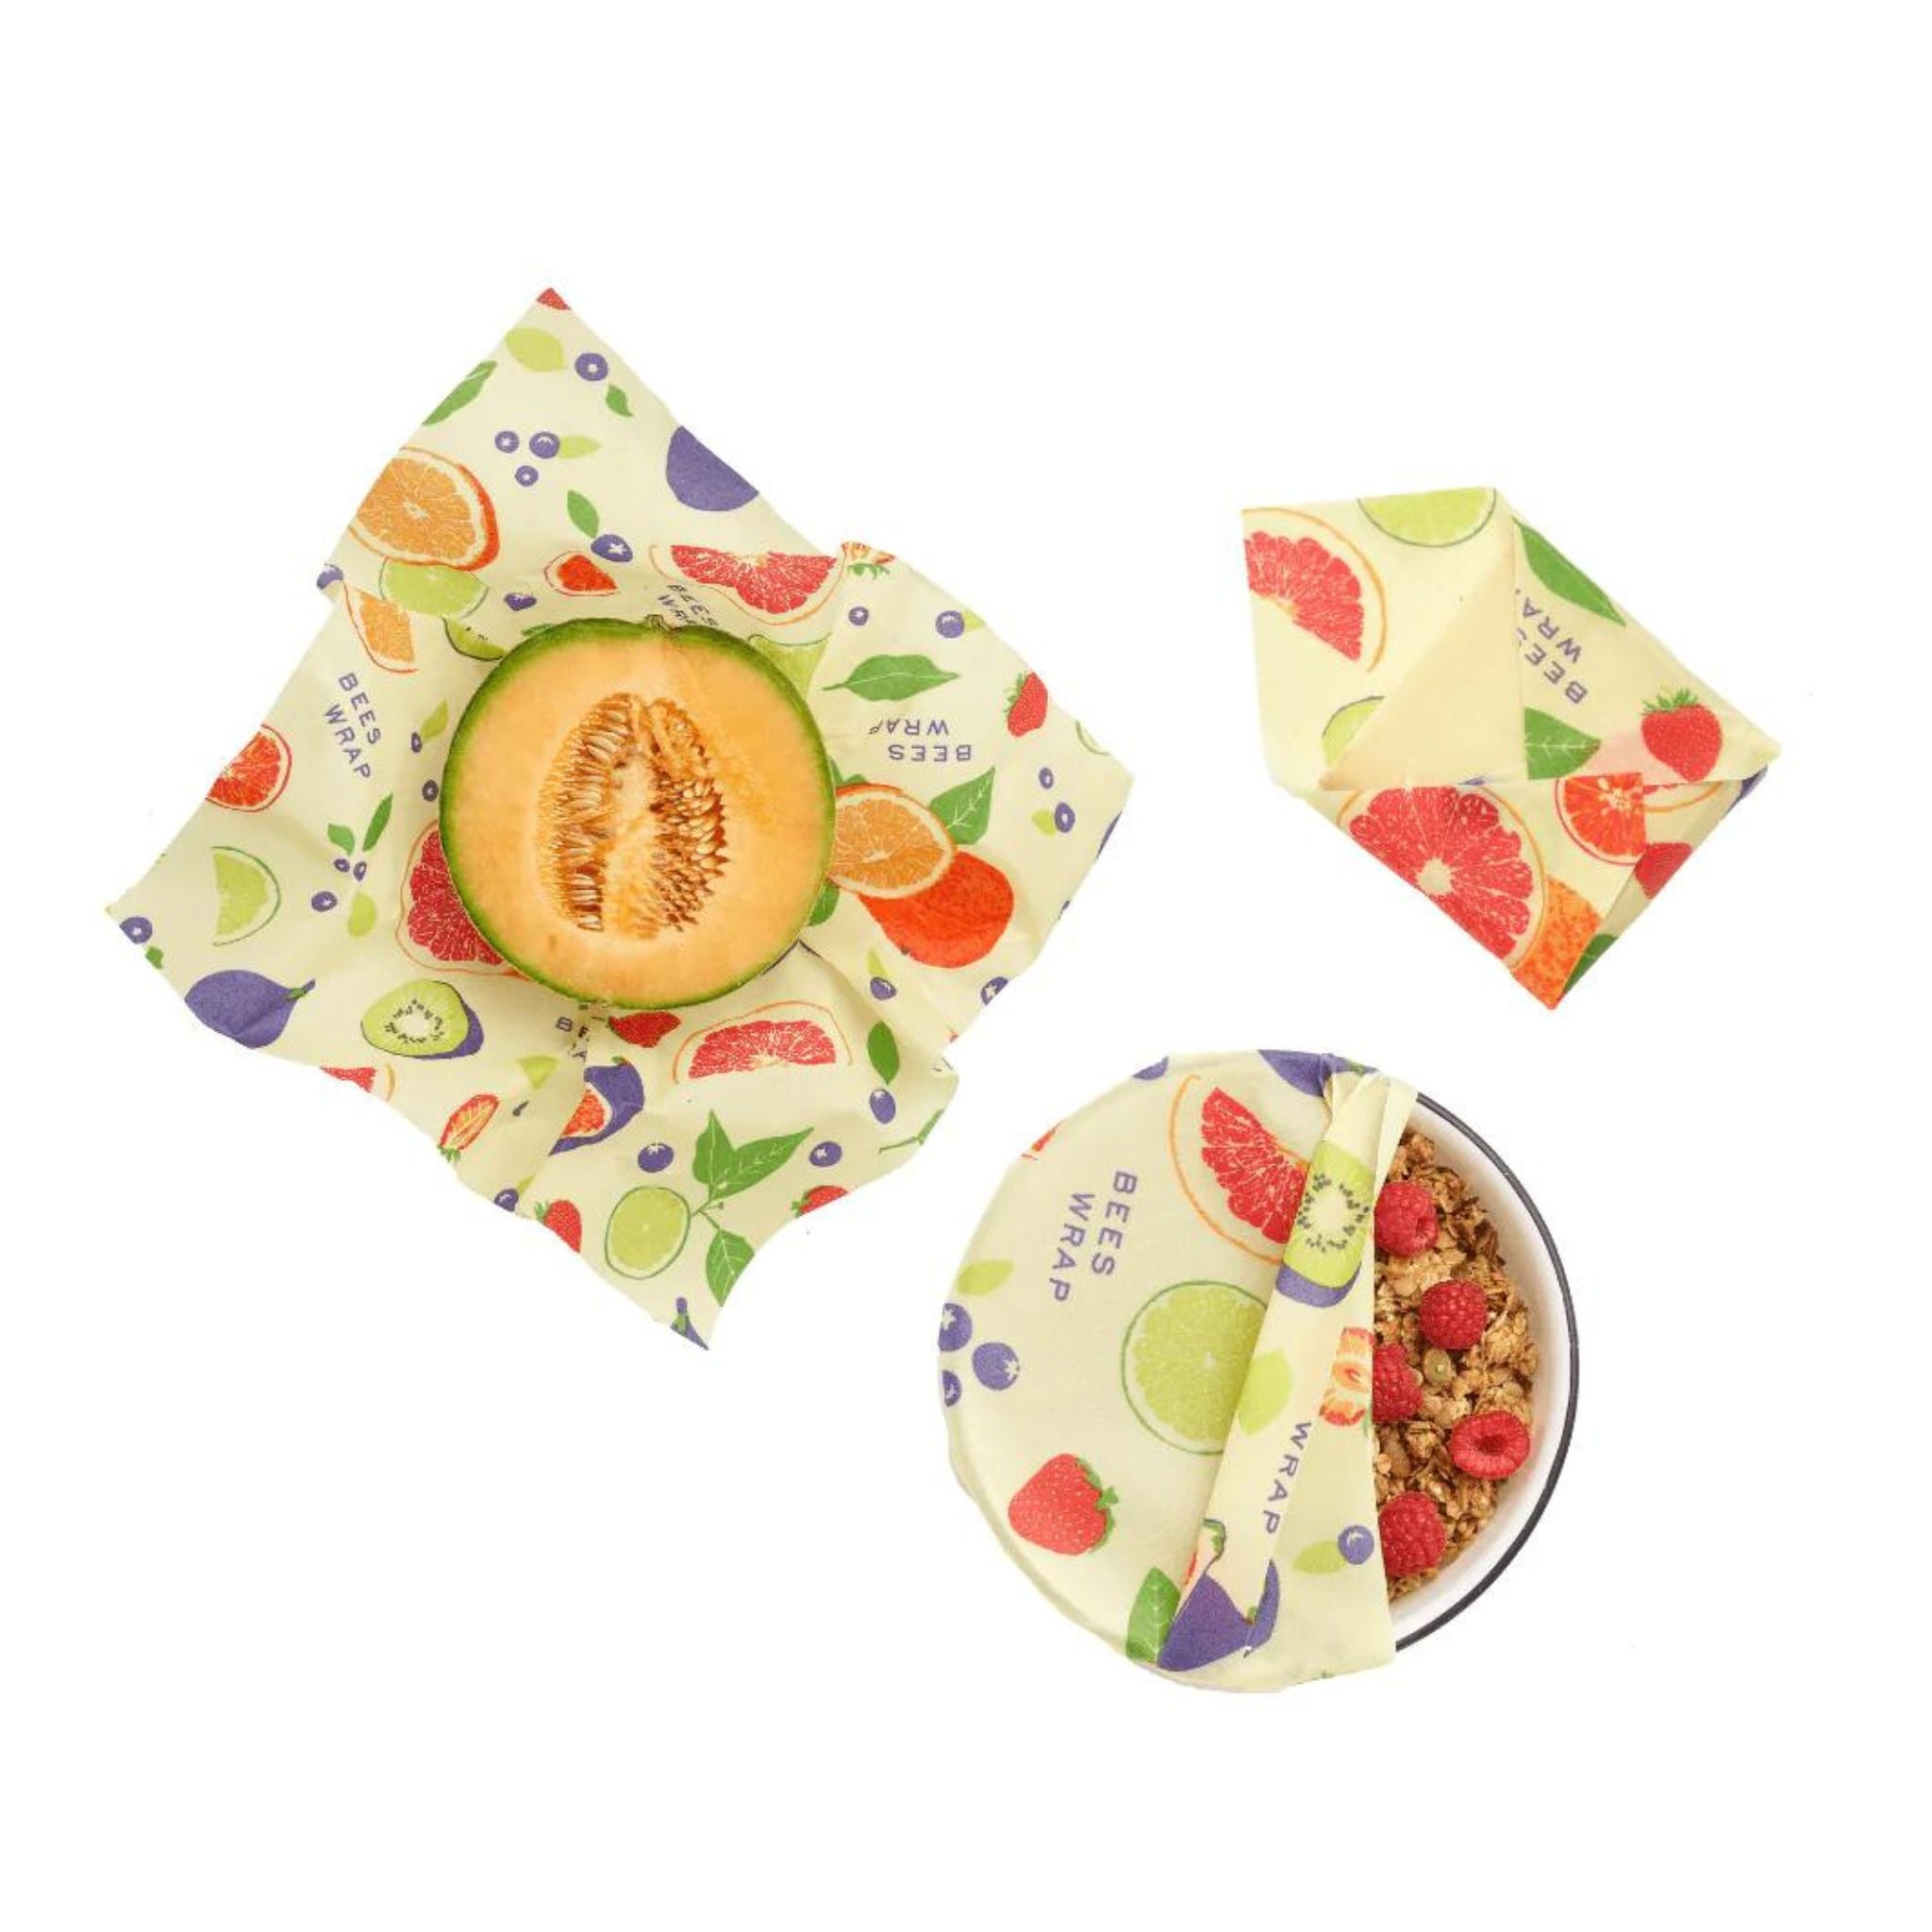 Bee's Wrap Assorted 3-Pack